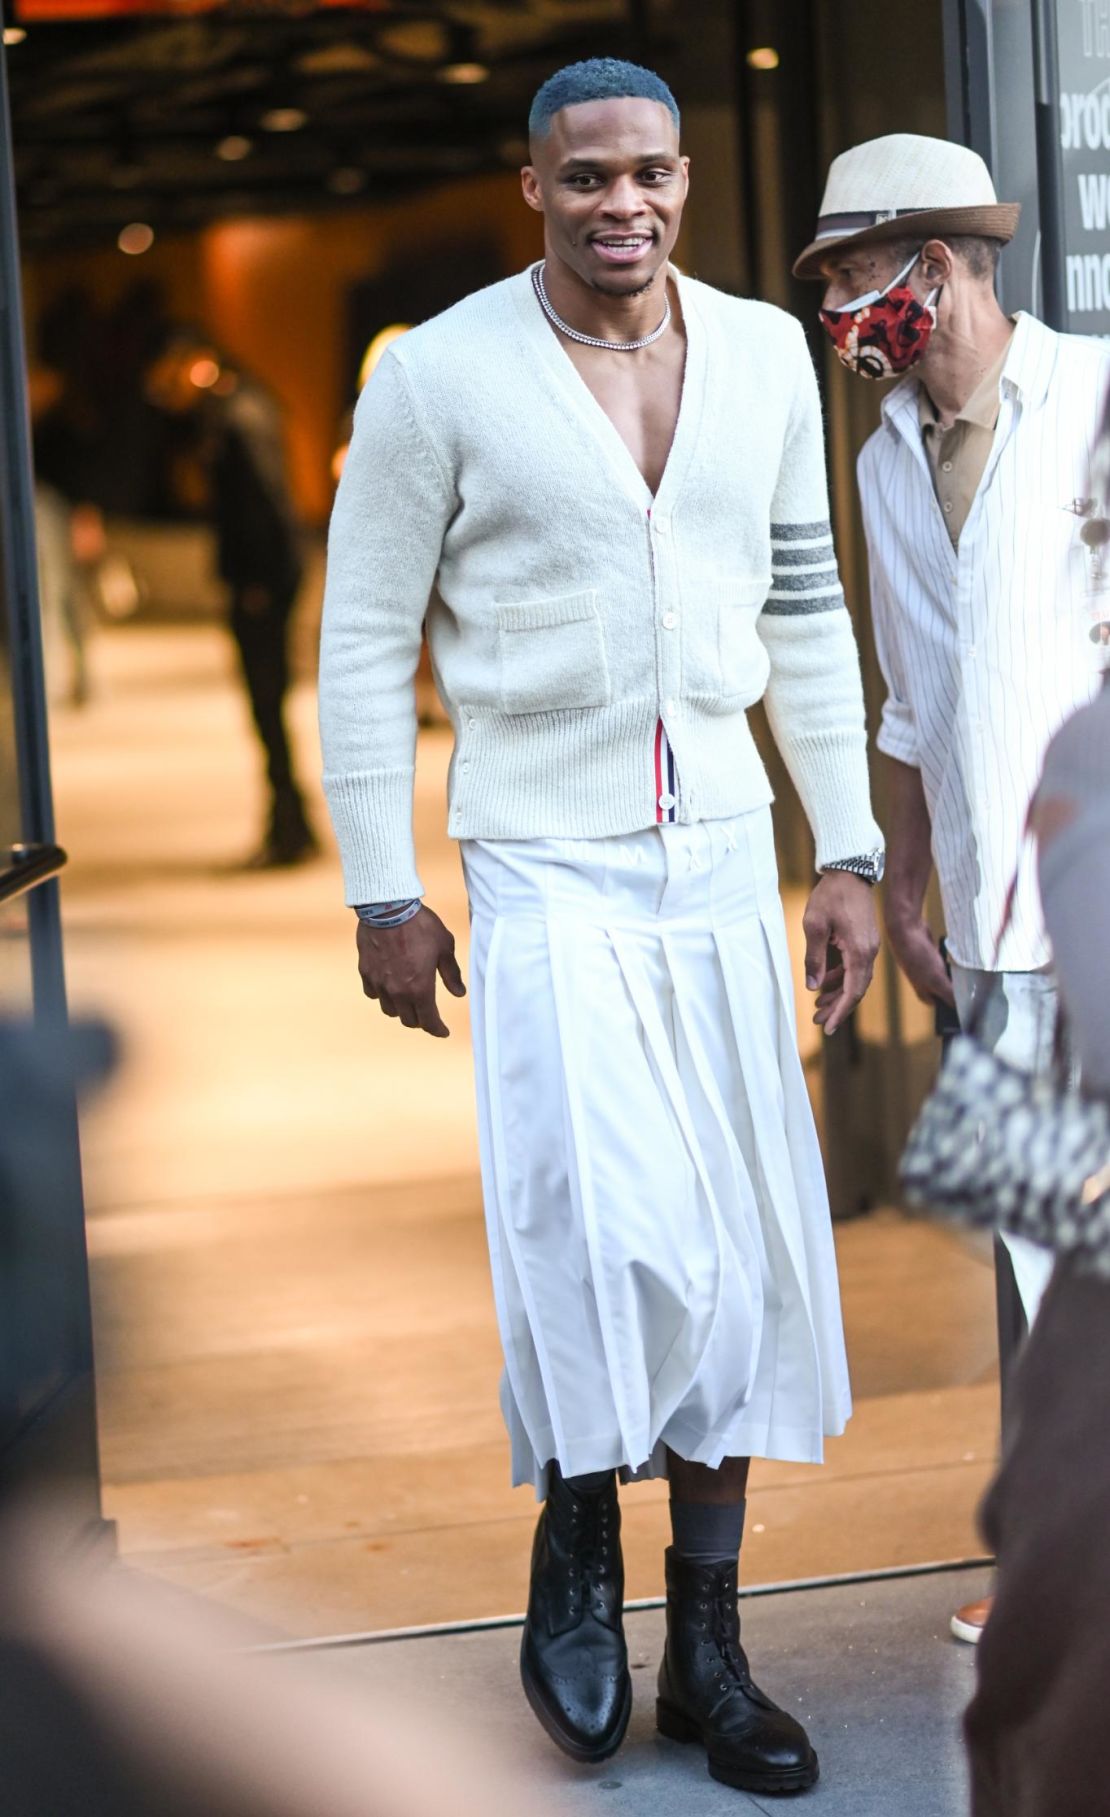 Basketball player Russell Westbrook wearing a skirt outside Thom Browne's show at the Spring-Summer 2022 edition of New York Fashion Week.